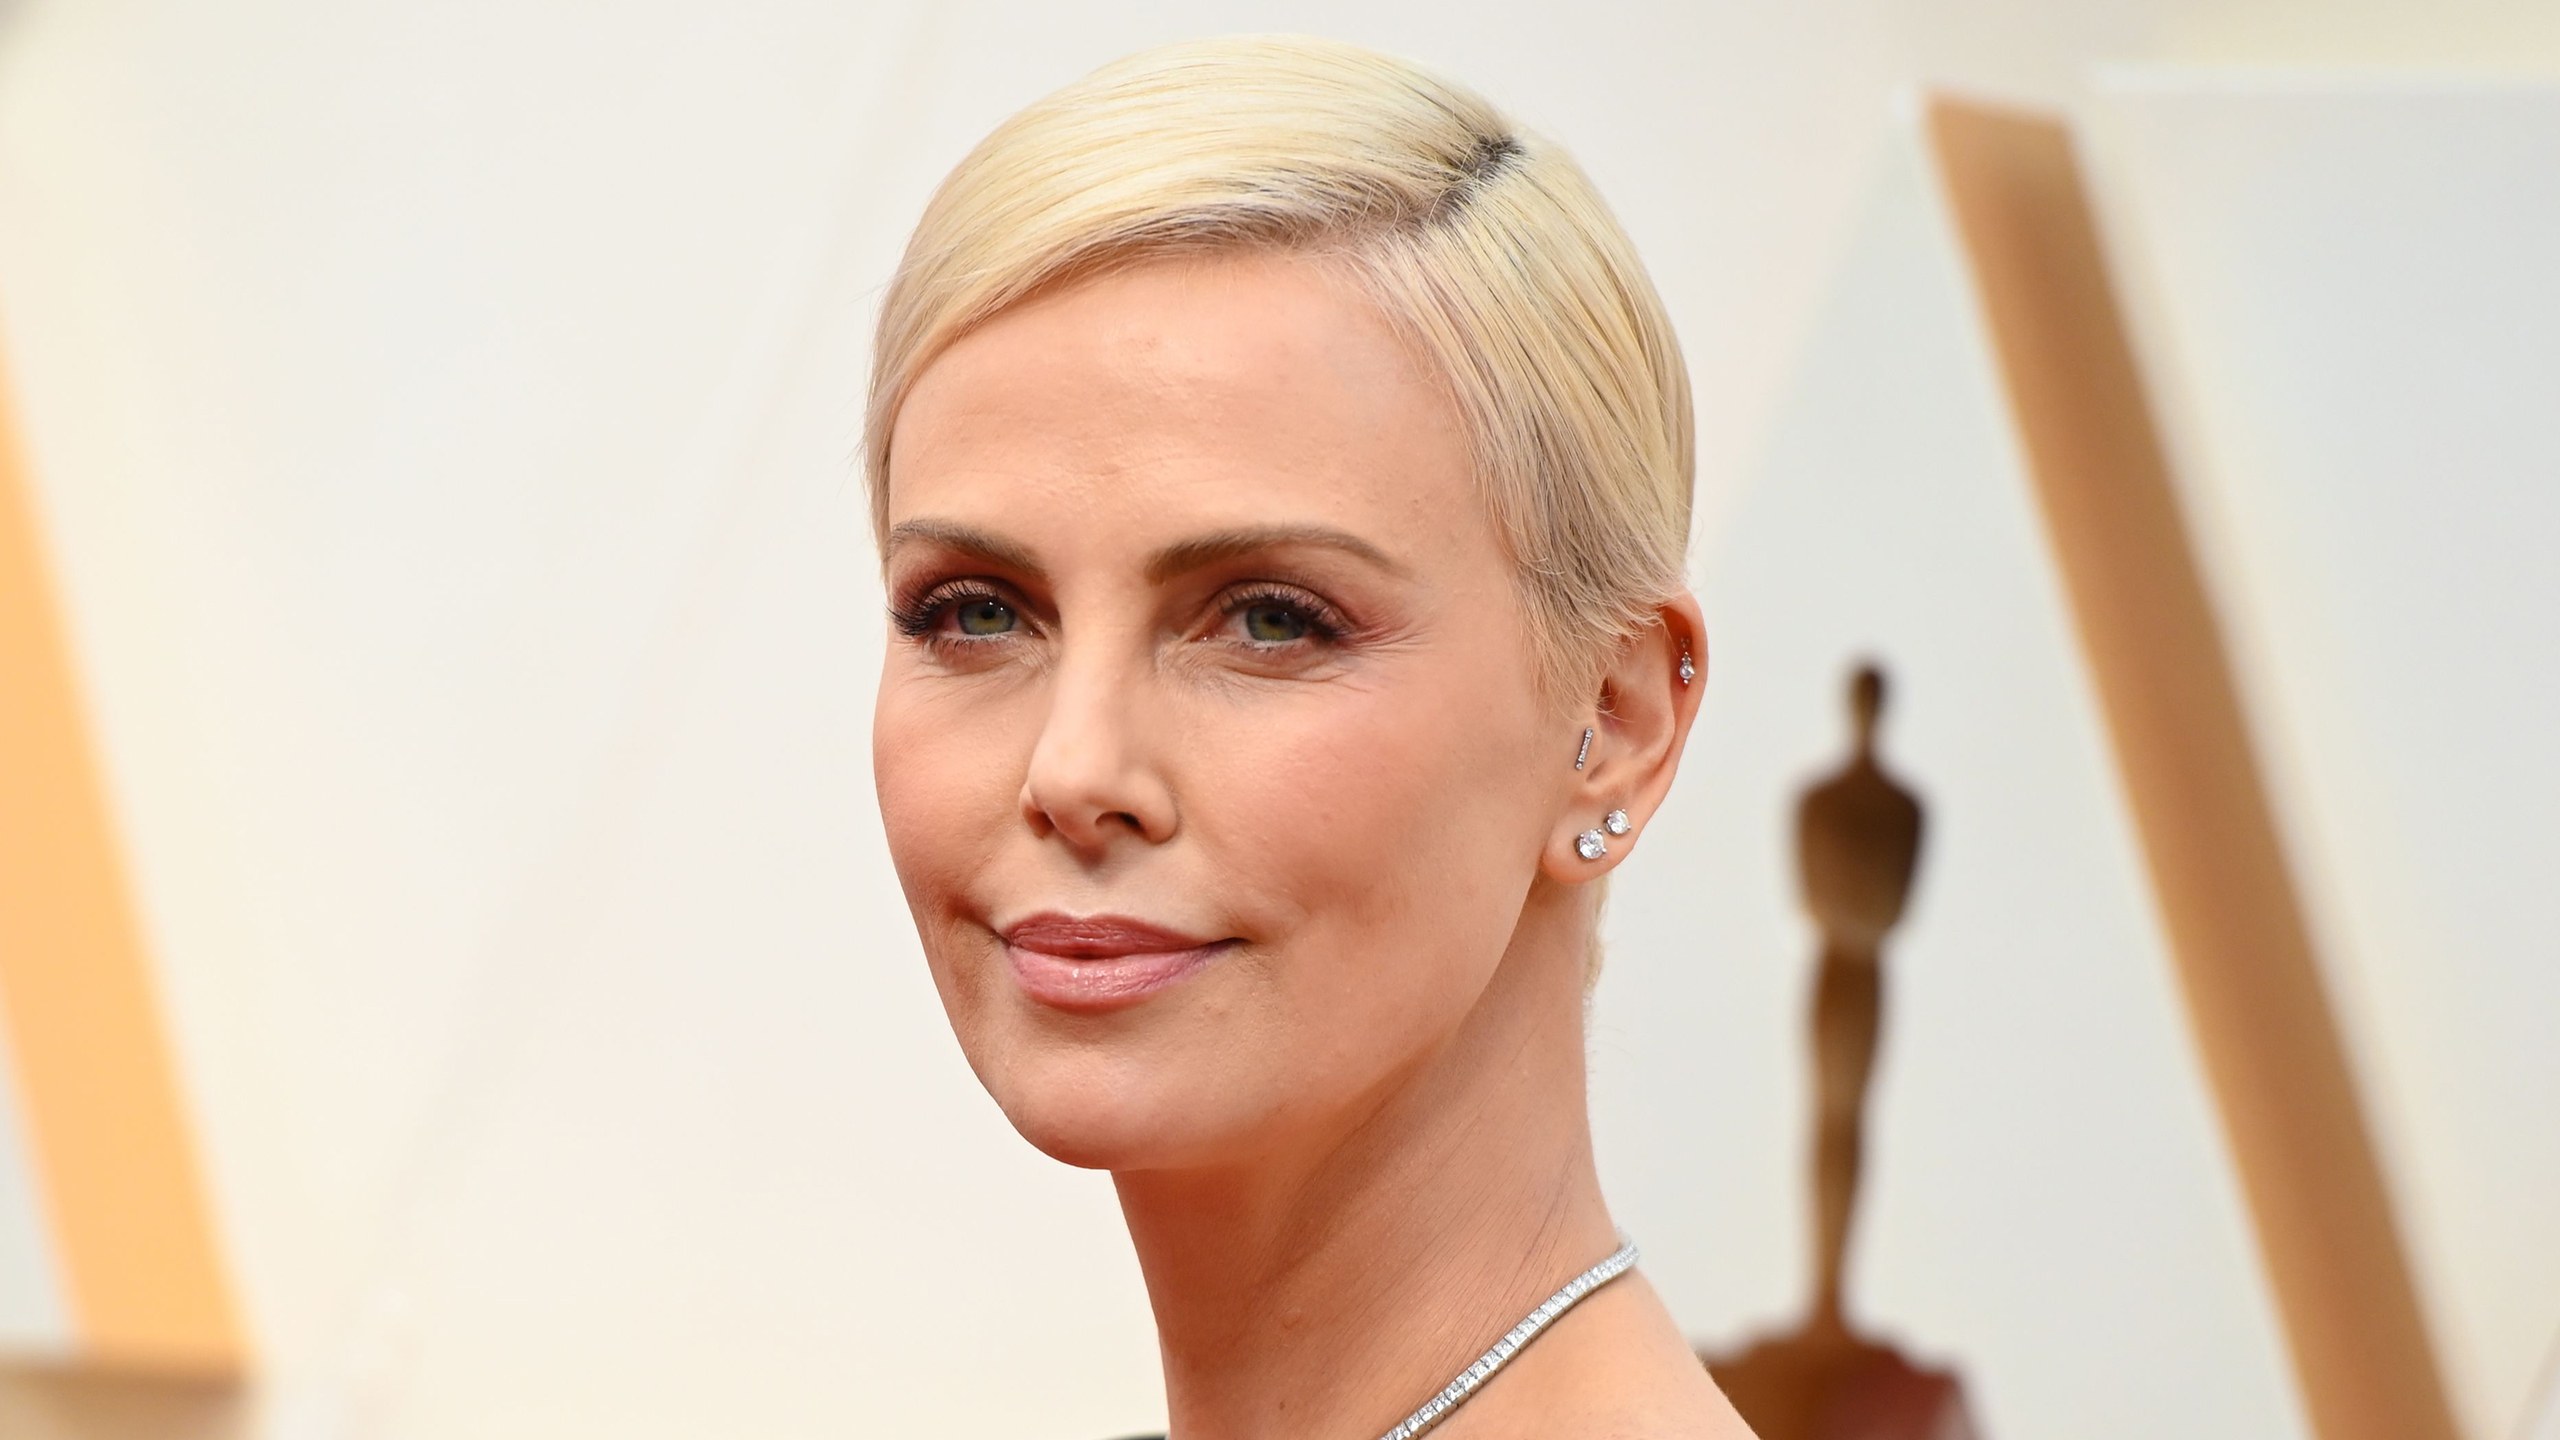 Charlize Theron’s Oscars Hairstyle Has a Hidden Surprise in the Back